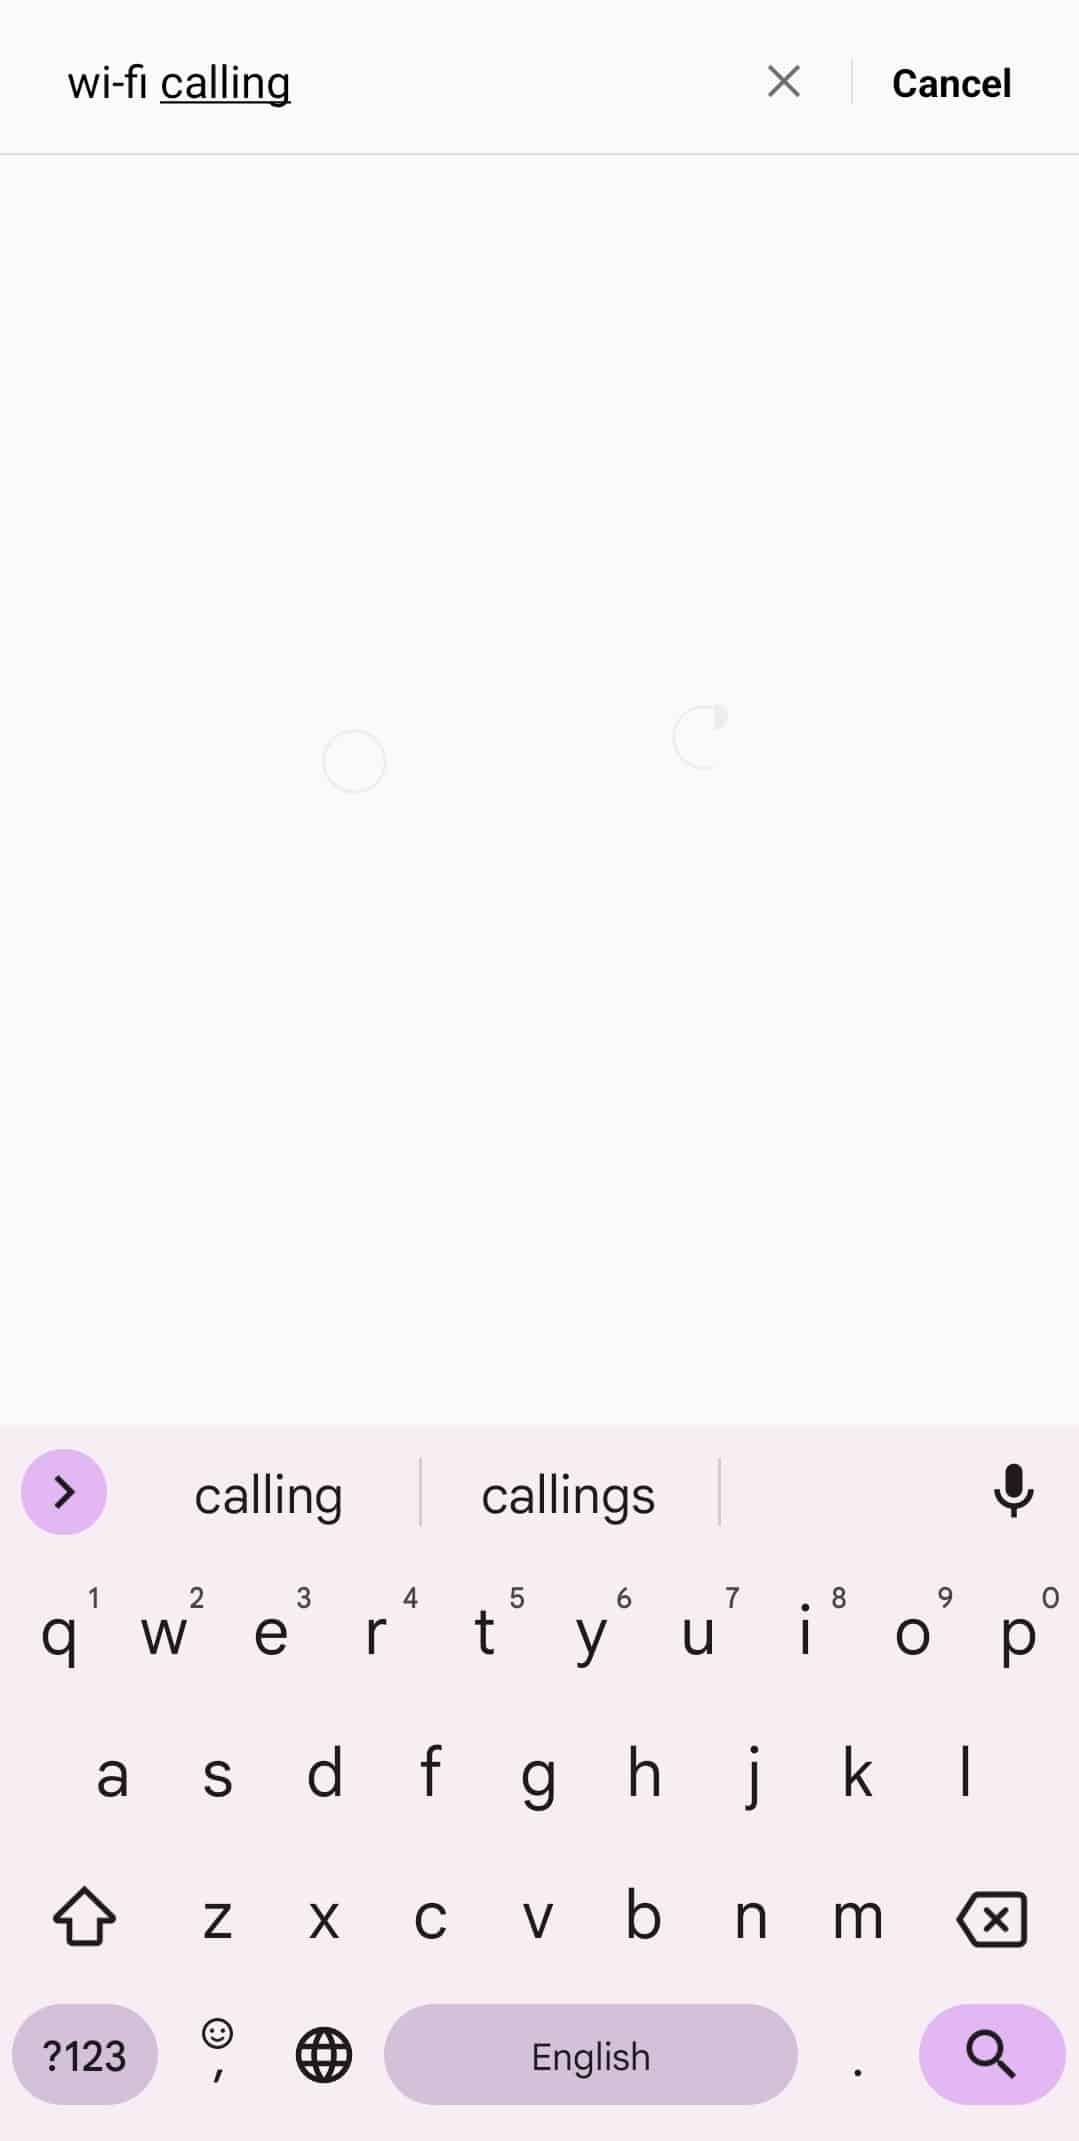 Type Wi-Fi calling in the search bar and press Enter